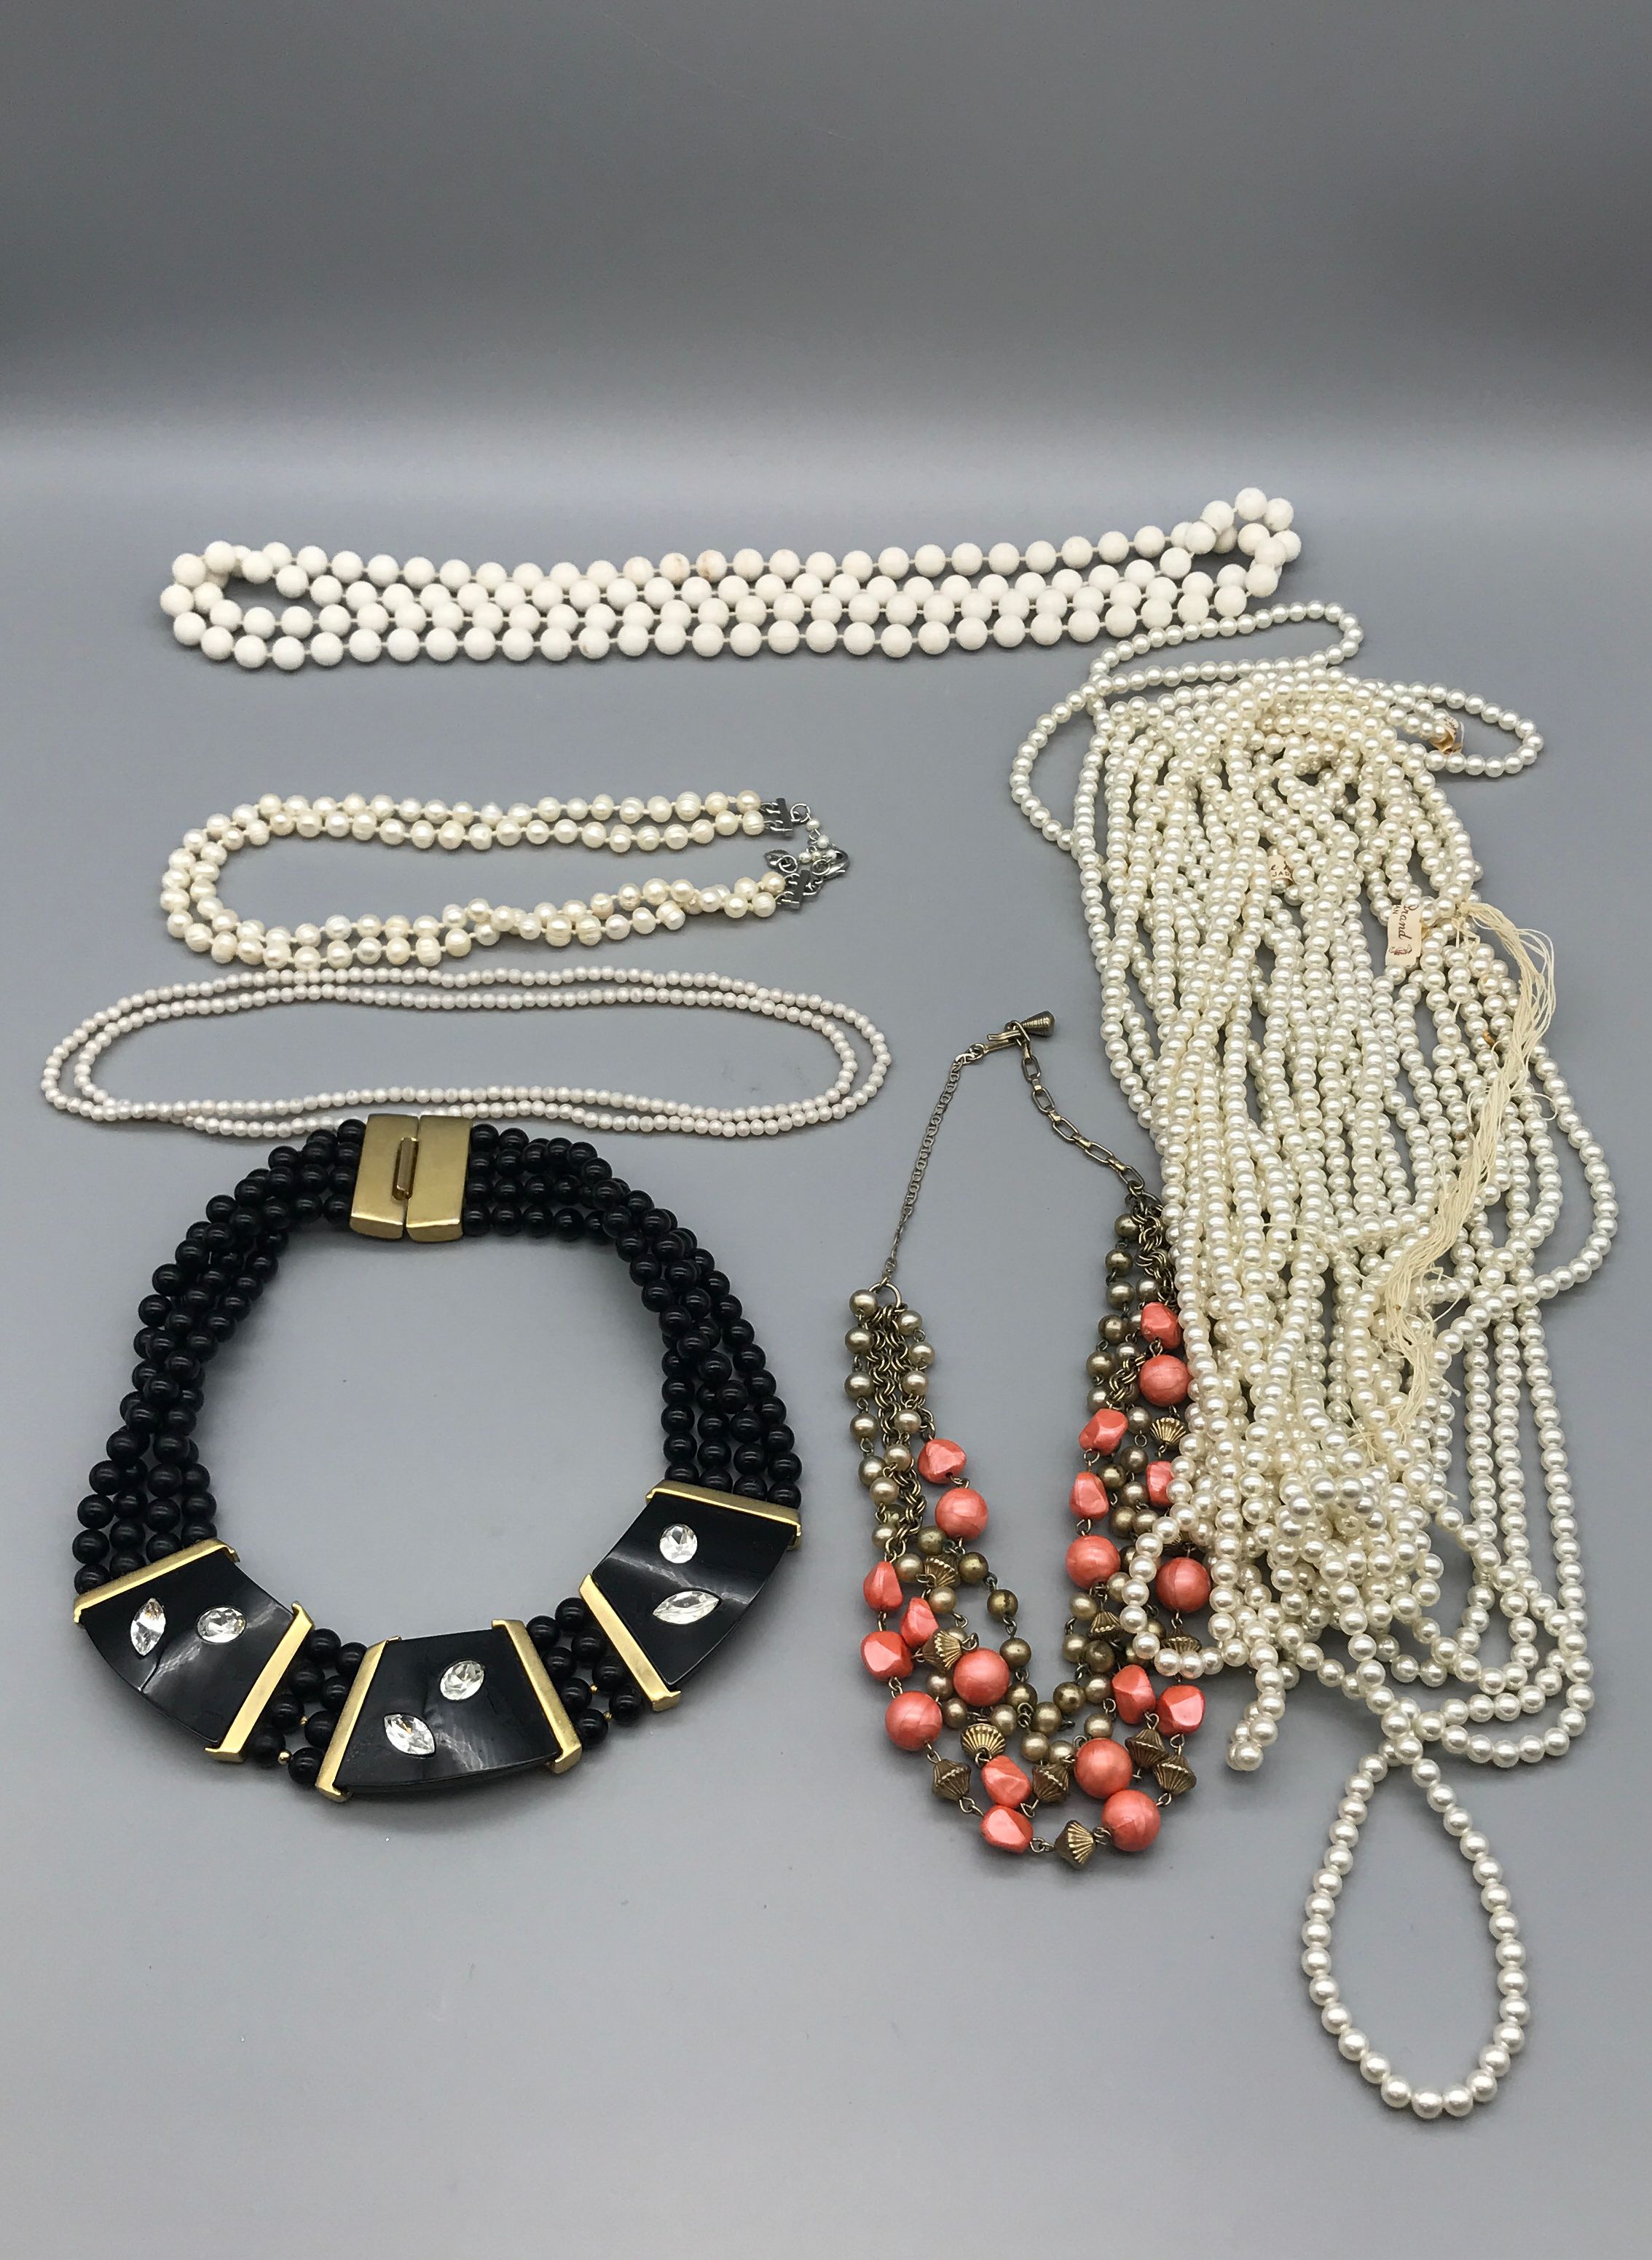 4.4 Pounds of Costume Jewelry- With Necklaces, Bracelets, Earrings, and more